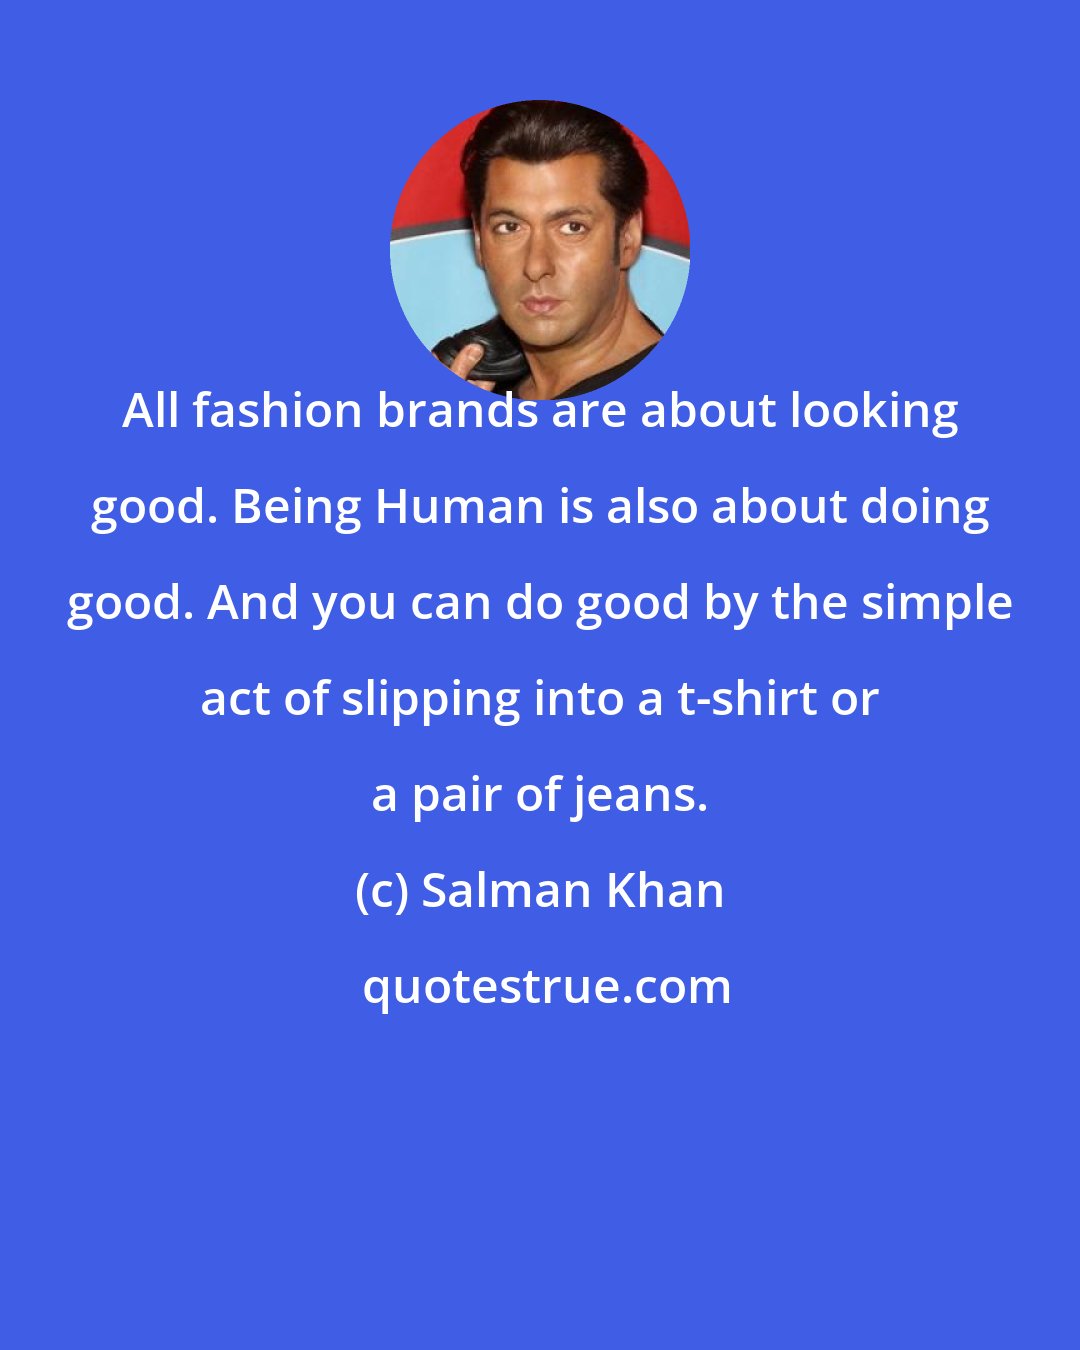 Salman Khan: All fashion brands are about looking good. Being Human is also about doing good. And you can do good by the simple act of slipping into a t-shirt or a pair of jeans.